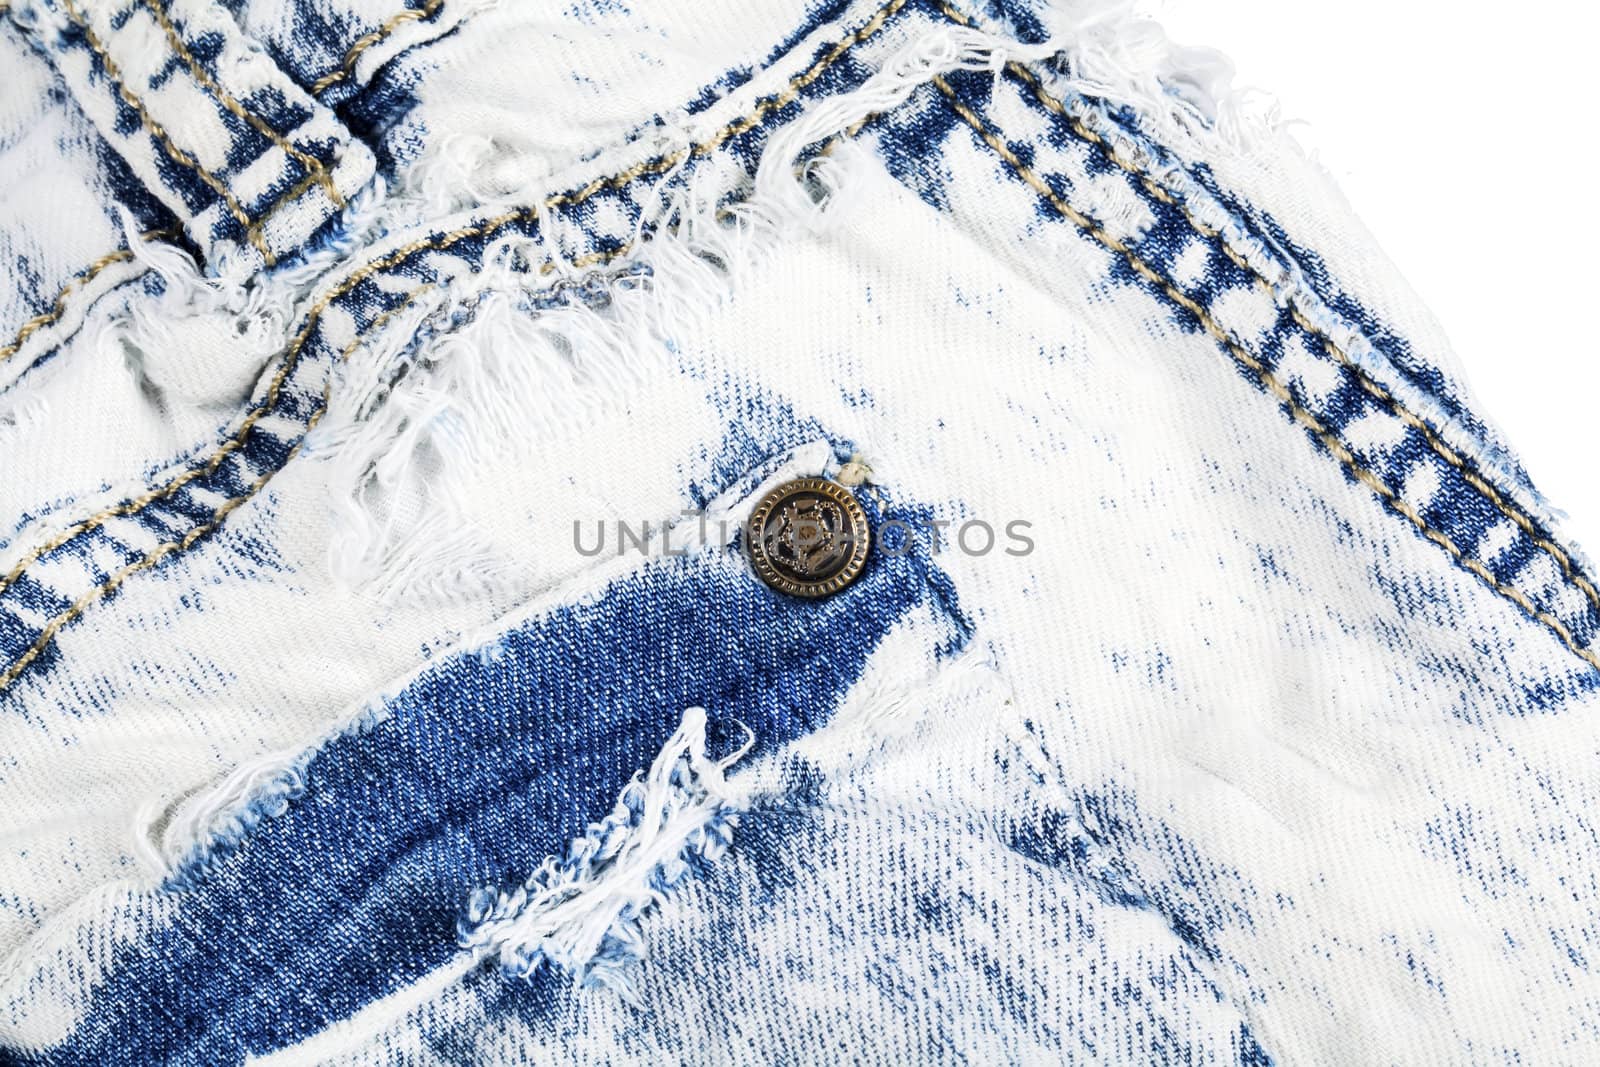 Jeans pocket with metal rivet by RawGroup